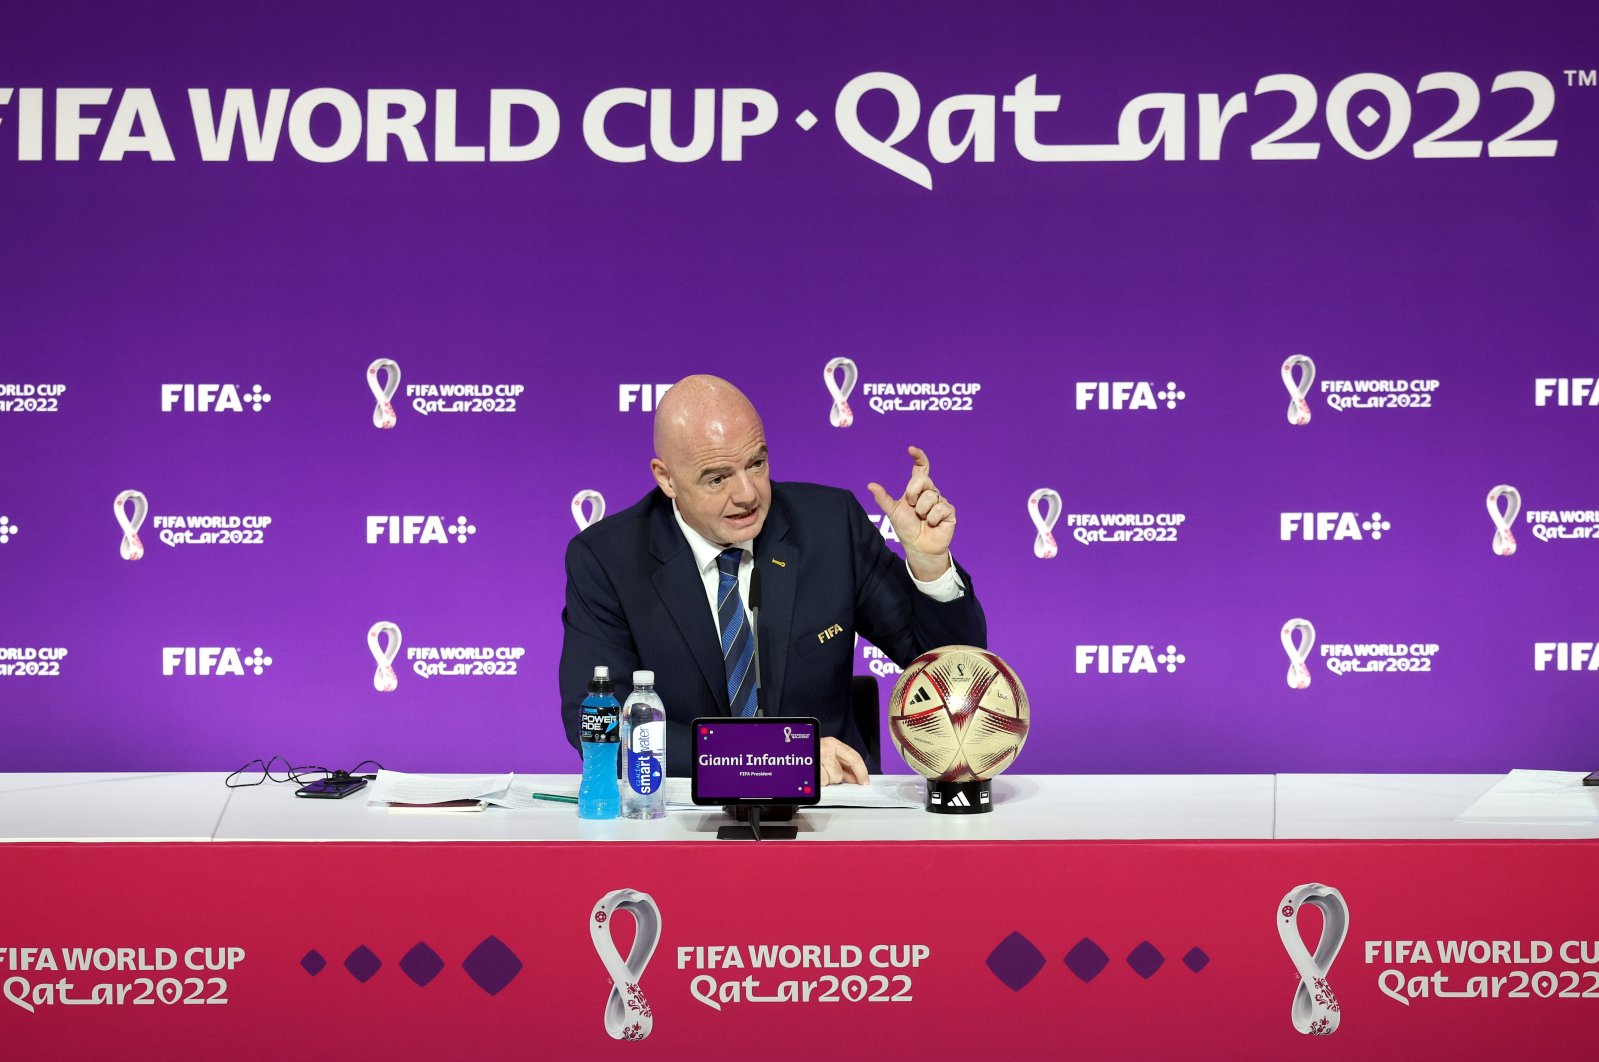 FIFA President Gianni Infantino speaks to the media ahead of the third place and final matches of the FIFA World Cup Qatar 2022 in Doha, Qatar, Dec. 16, 2022. (Getty Images Photo)